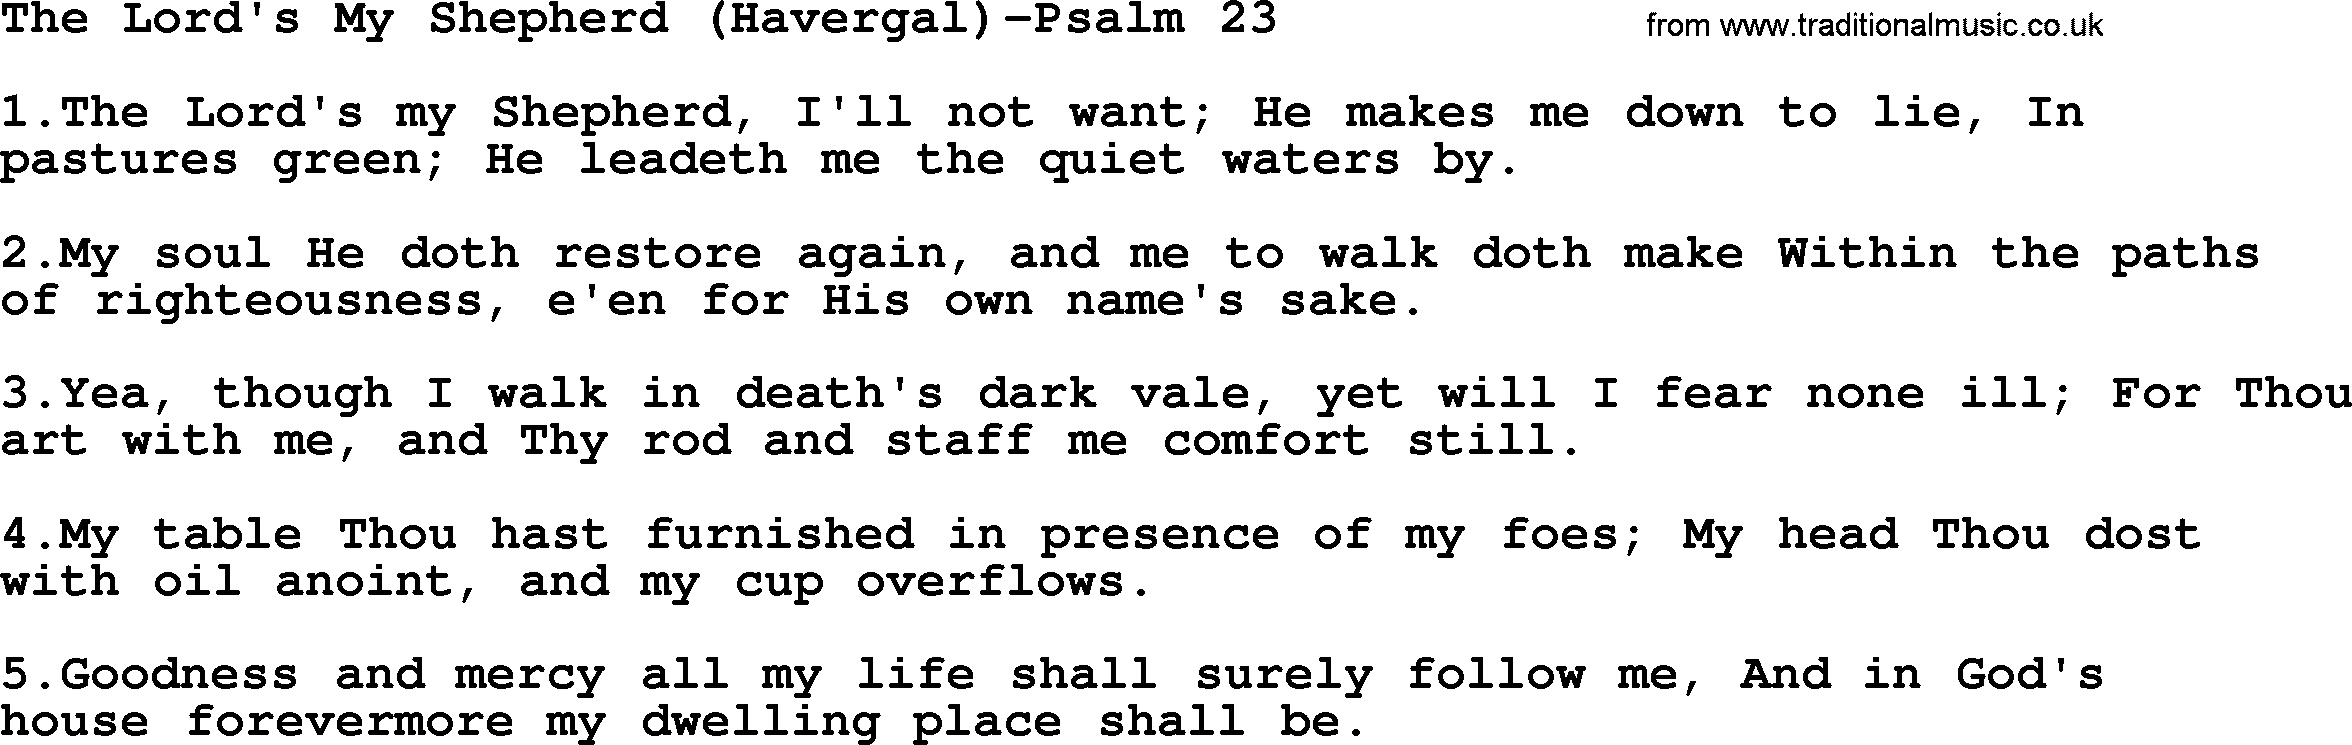 Hymns from the Psalms, Hymn: The Lord's My Shepherd (Havergal)-Psalm 23, lyrics with PDF